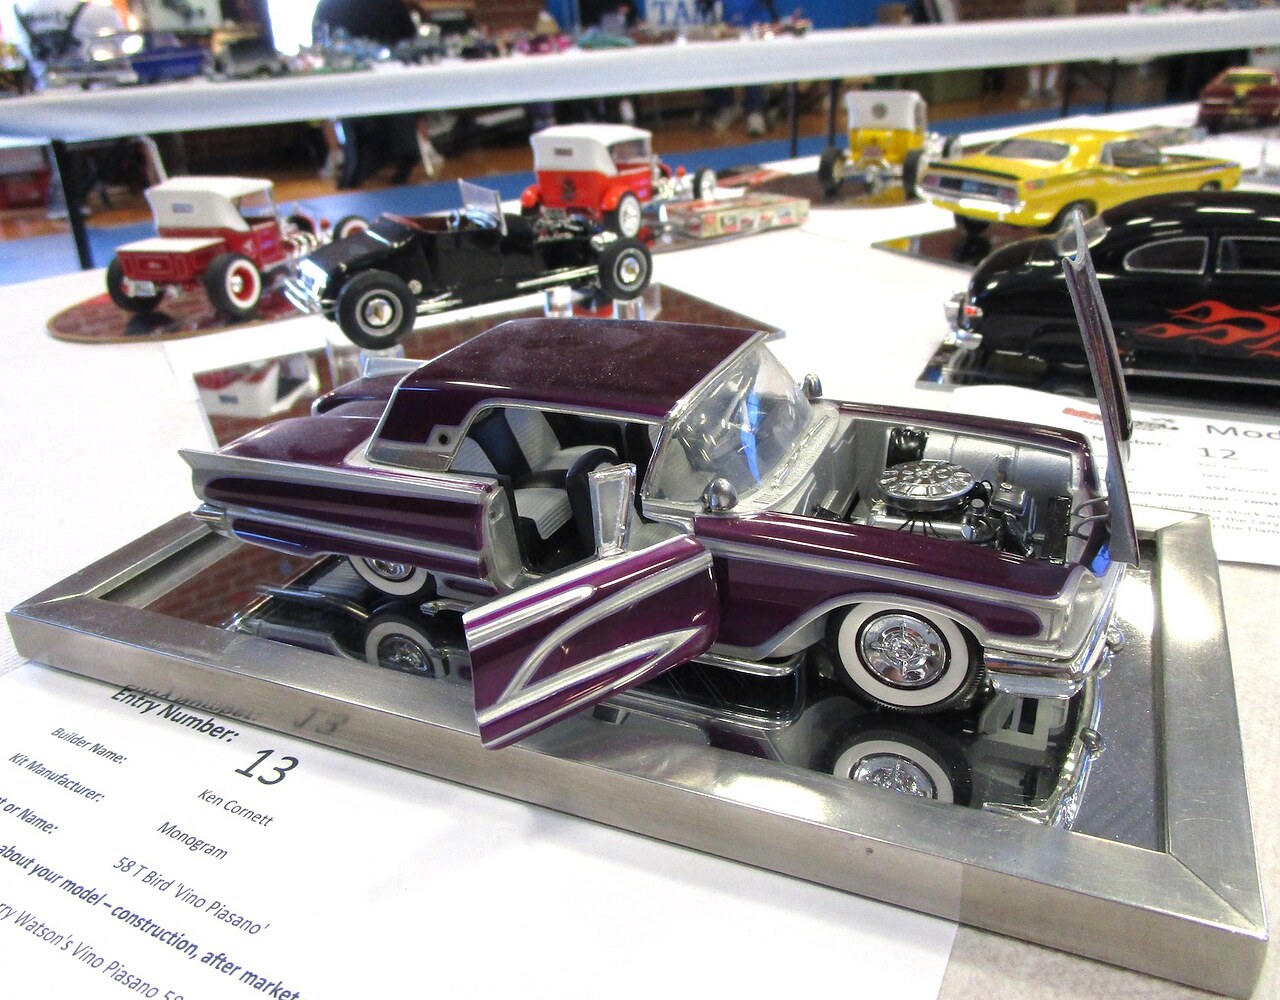 SoCal Open 2021 Model Car Show California Pictures Events & Shows